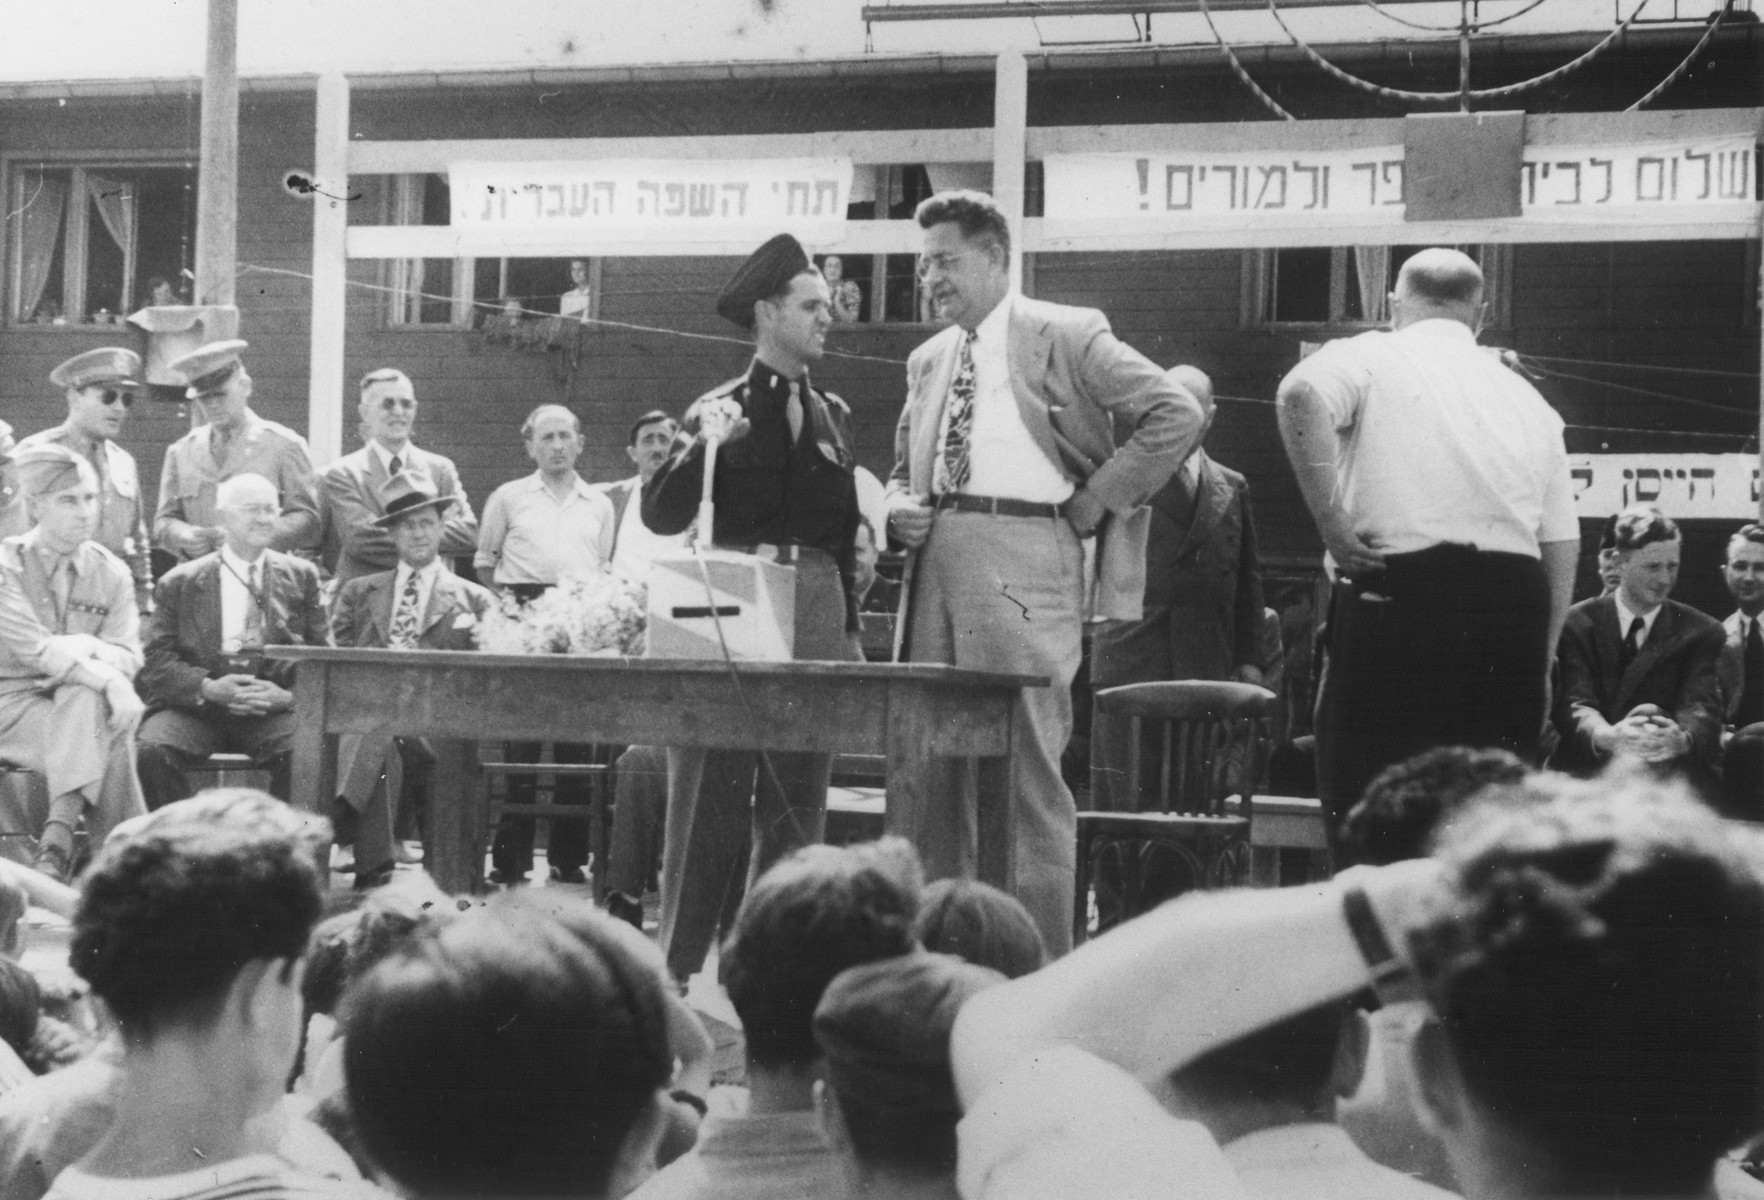 U.S. Army chaplain Rabbi Mayer Abramowitz converses with an official at an outdoor forum in the Schlachtensee displaced persons camp.

The forum was held for the benefit of a visiting international commission.  Above the podium is a sign in Hebrew that reads, "Long live the Hebrew language."